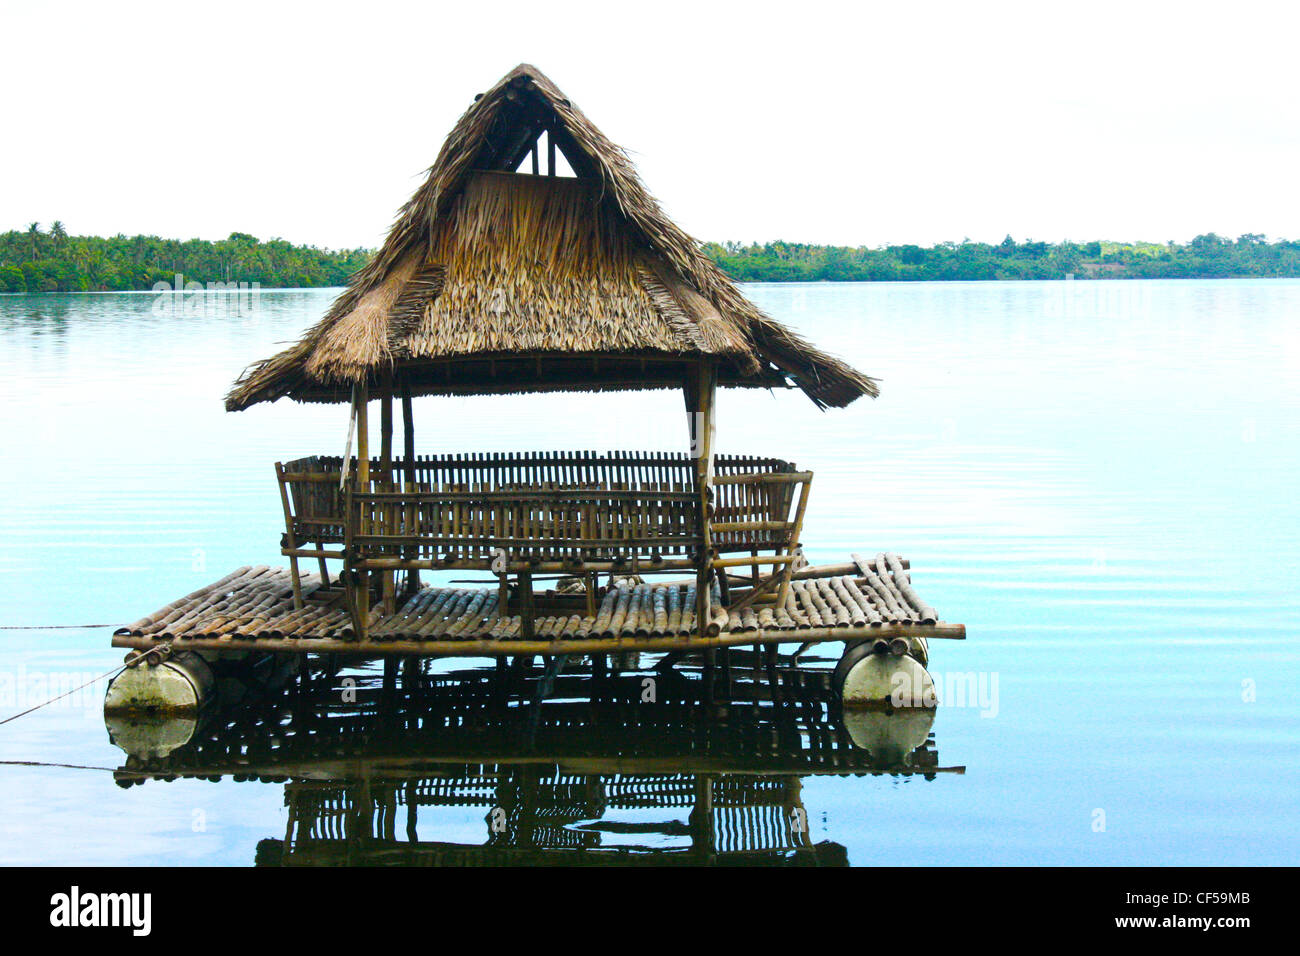 Floating hut stock photography and images - Alamy